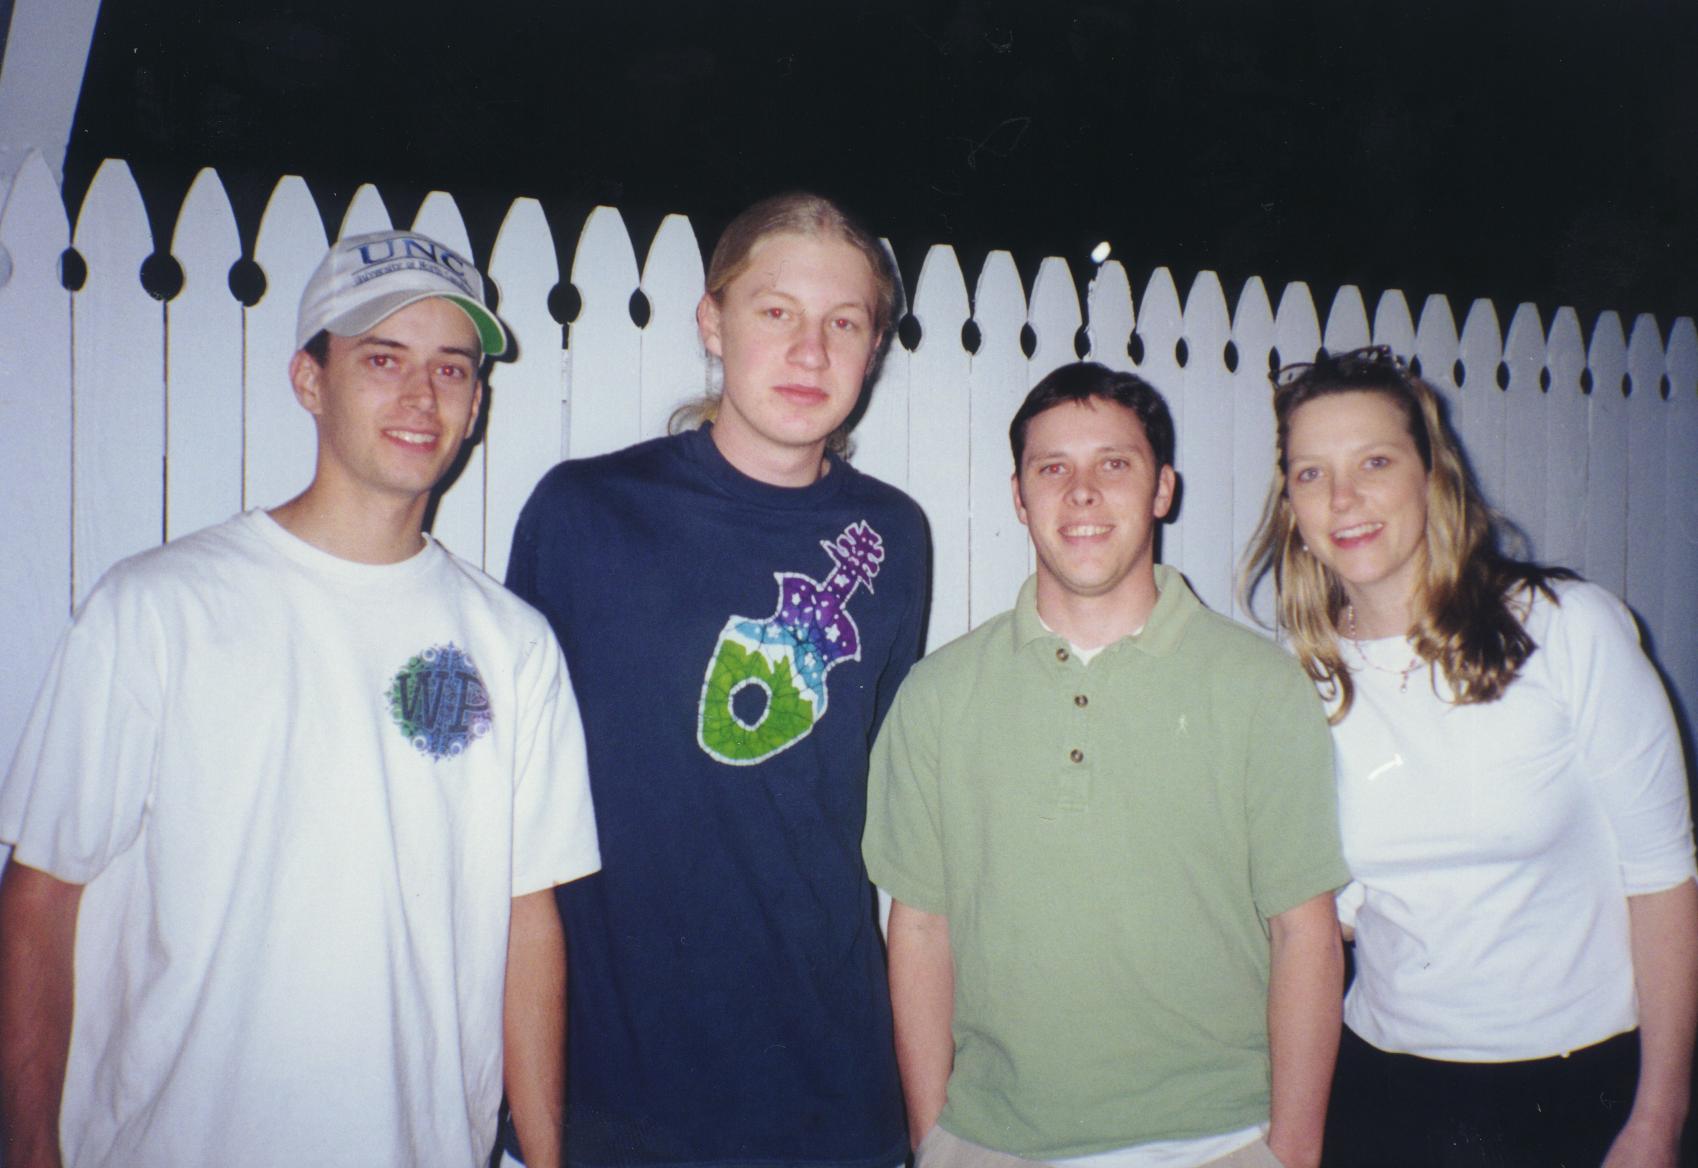 Derek, Susan, my cousin and me at Sushi Rock before the March 31, 2000 show at the Roxy in Atlanta.